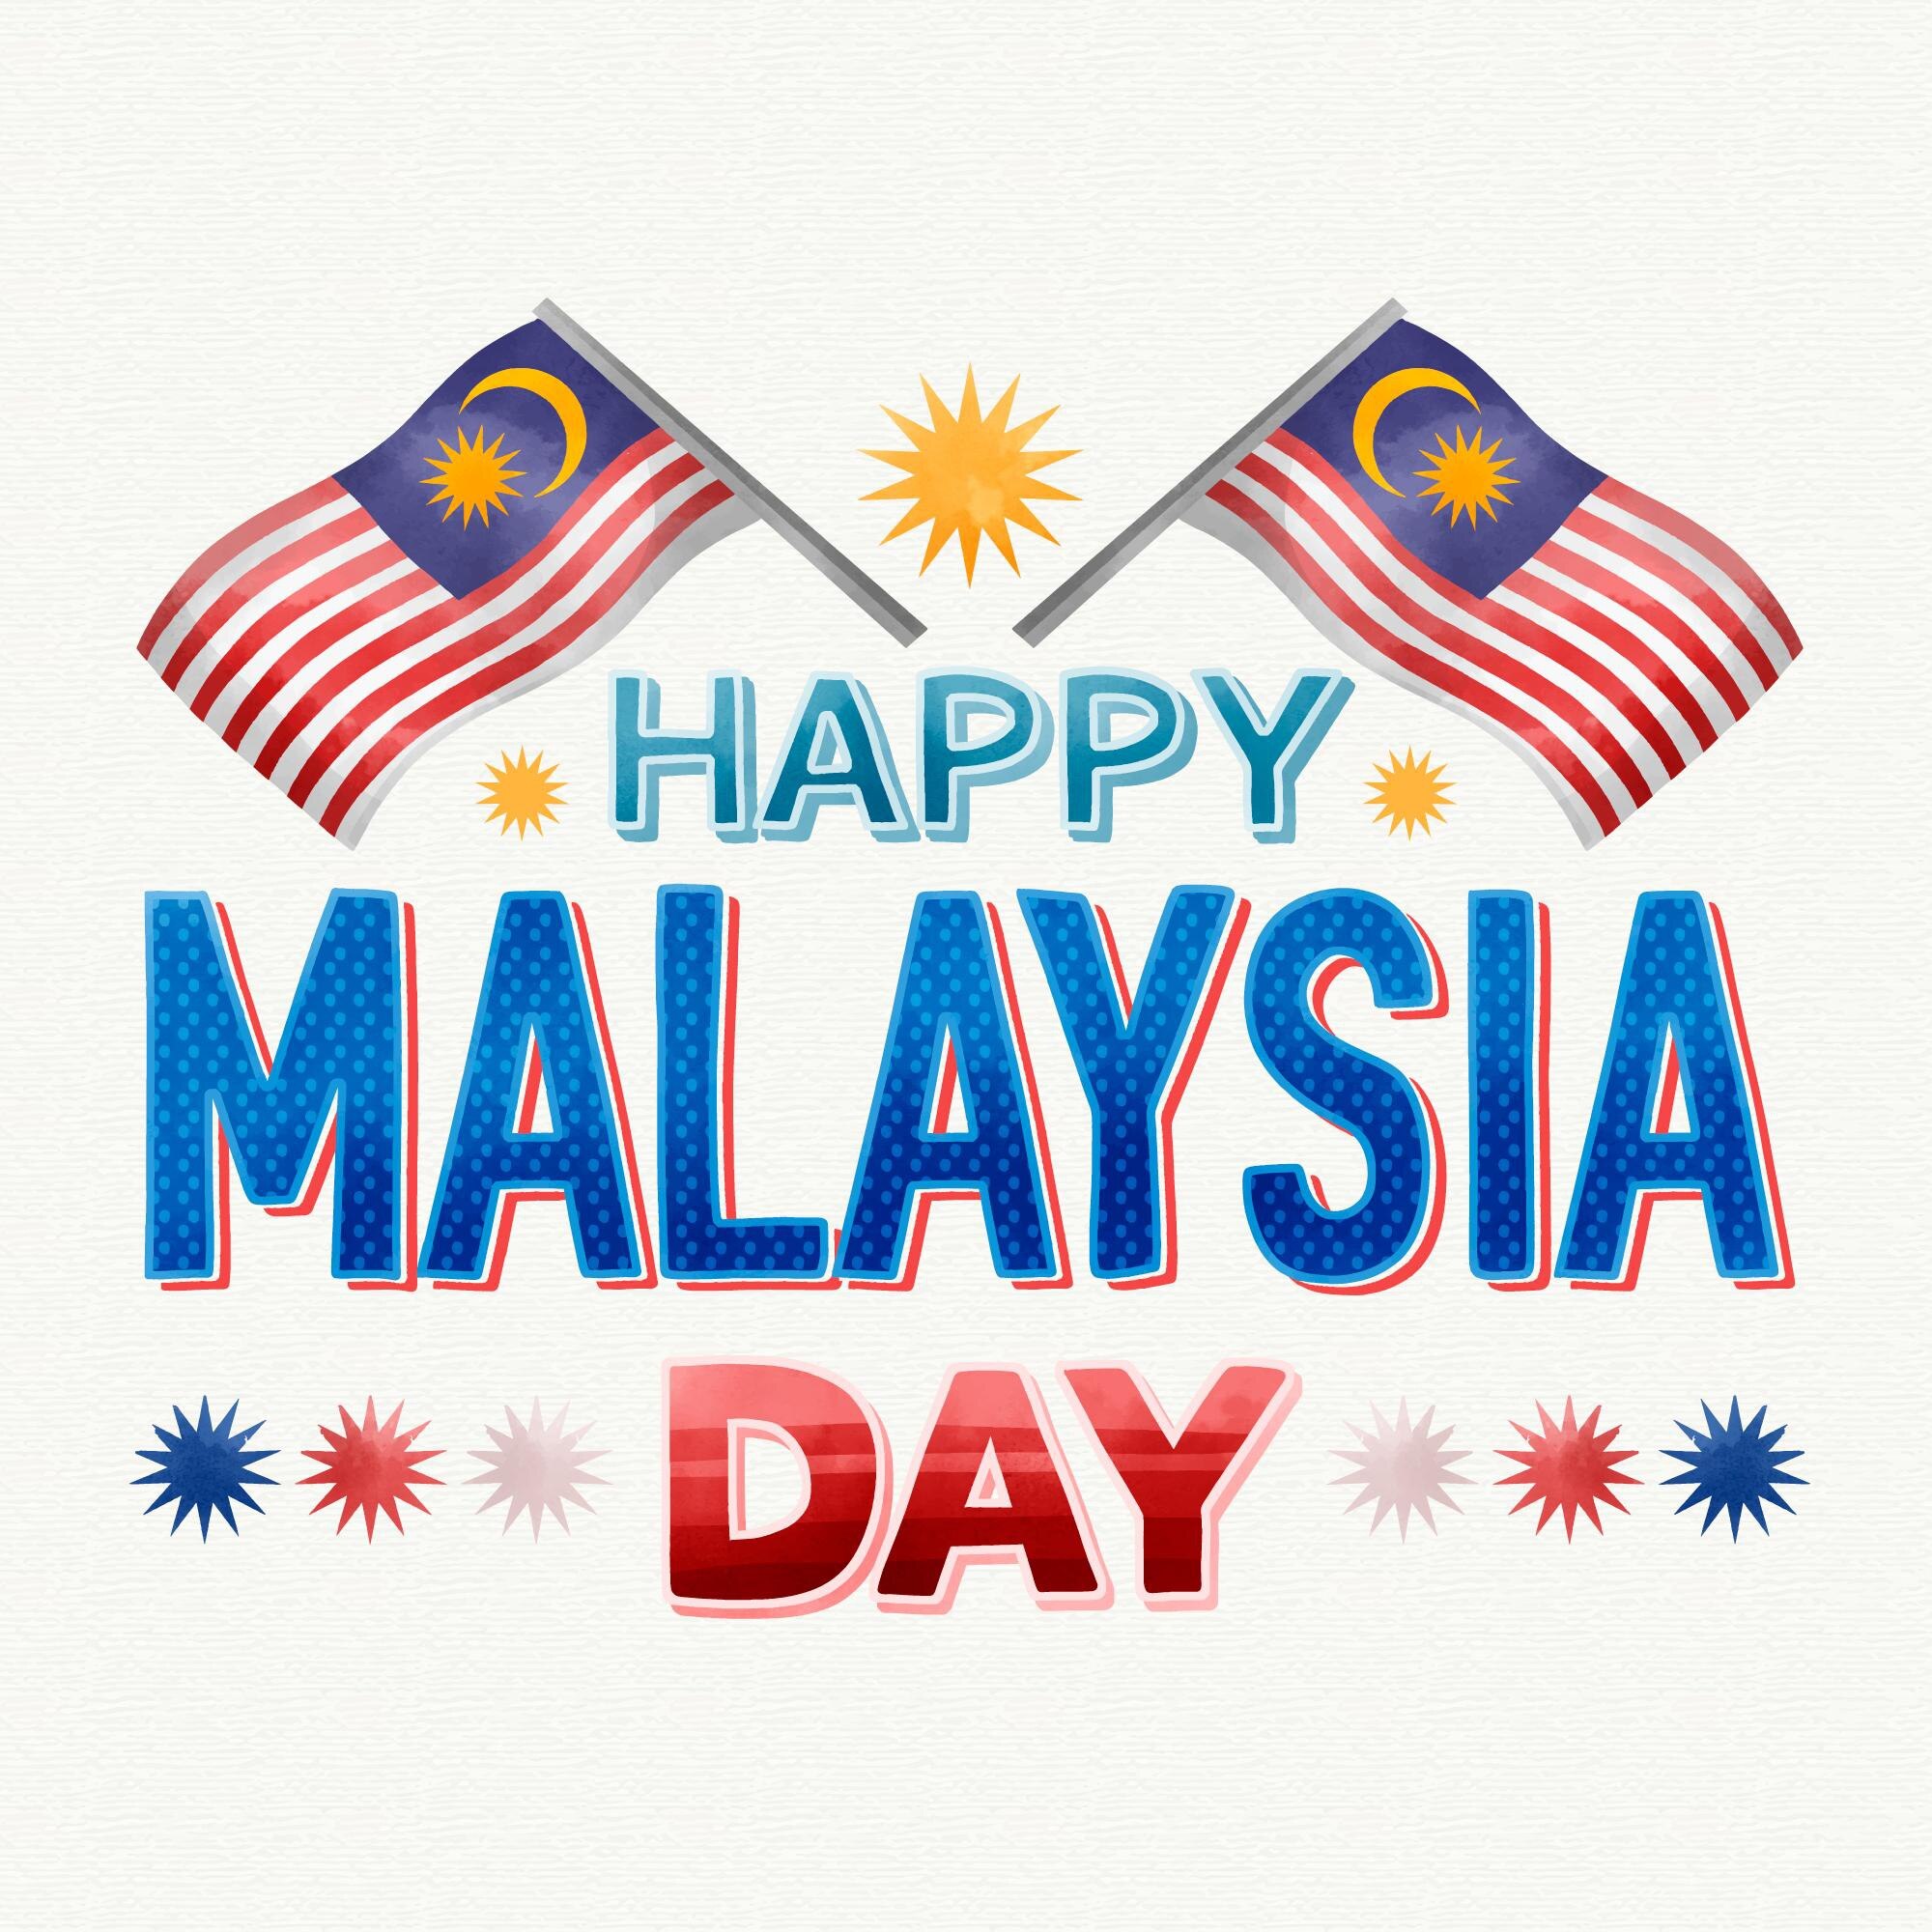 Hari Malaysia 2022: Posters, Quotes, Wishes, Images, Greetings, Slogans, and Instagram Captions